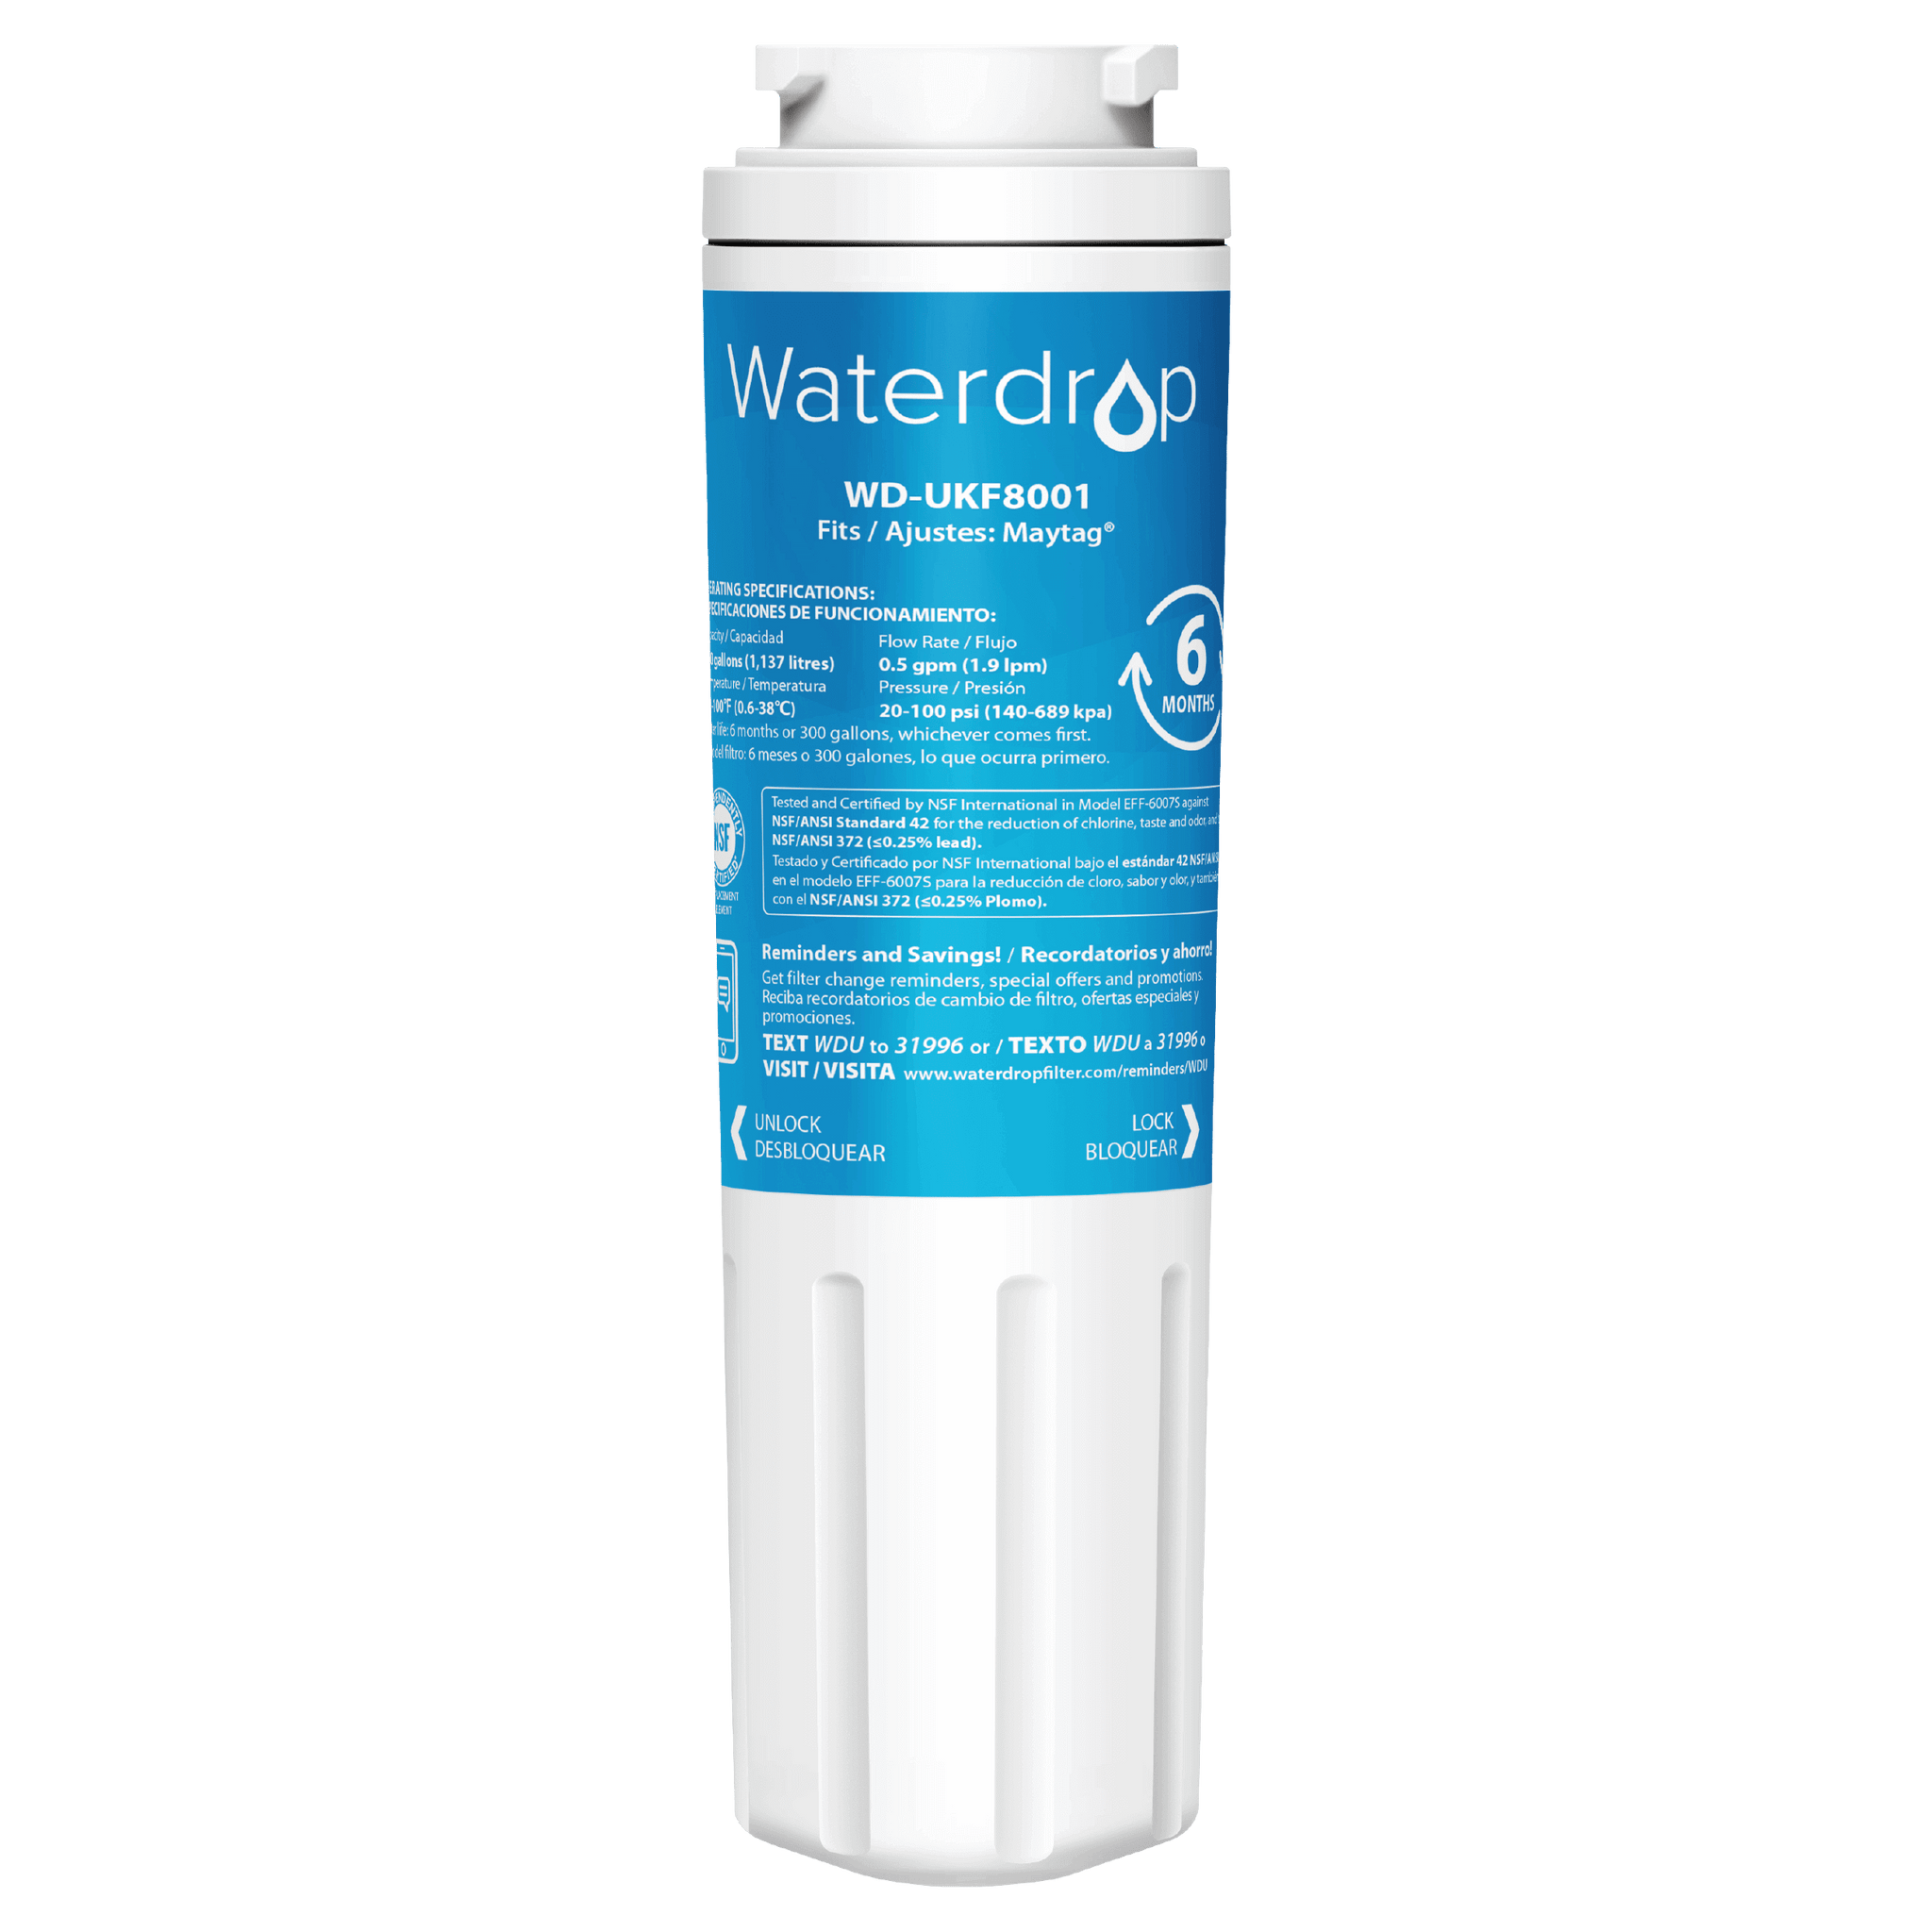 Waterdrop Replacement for Everydrop Filter 4, UKF8001(4packs)